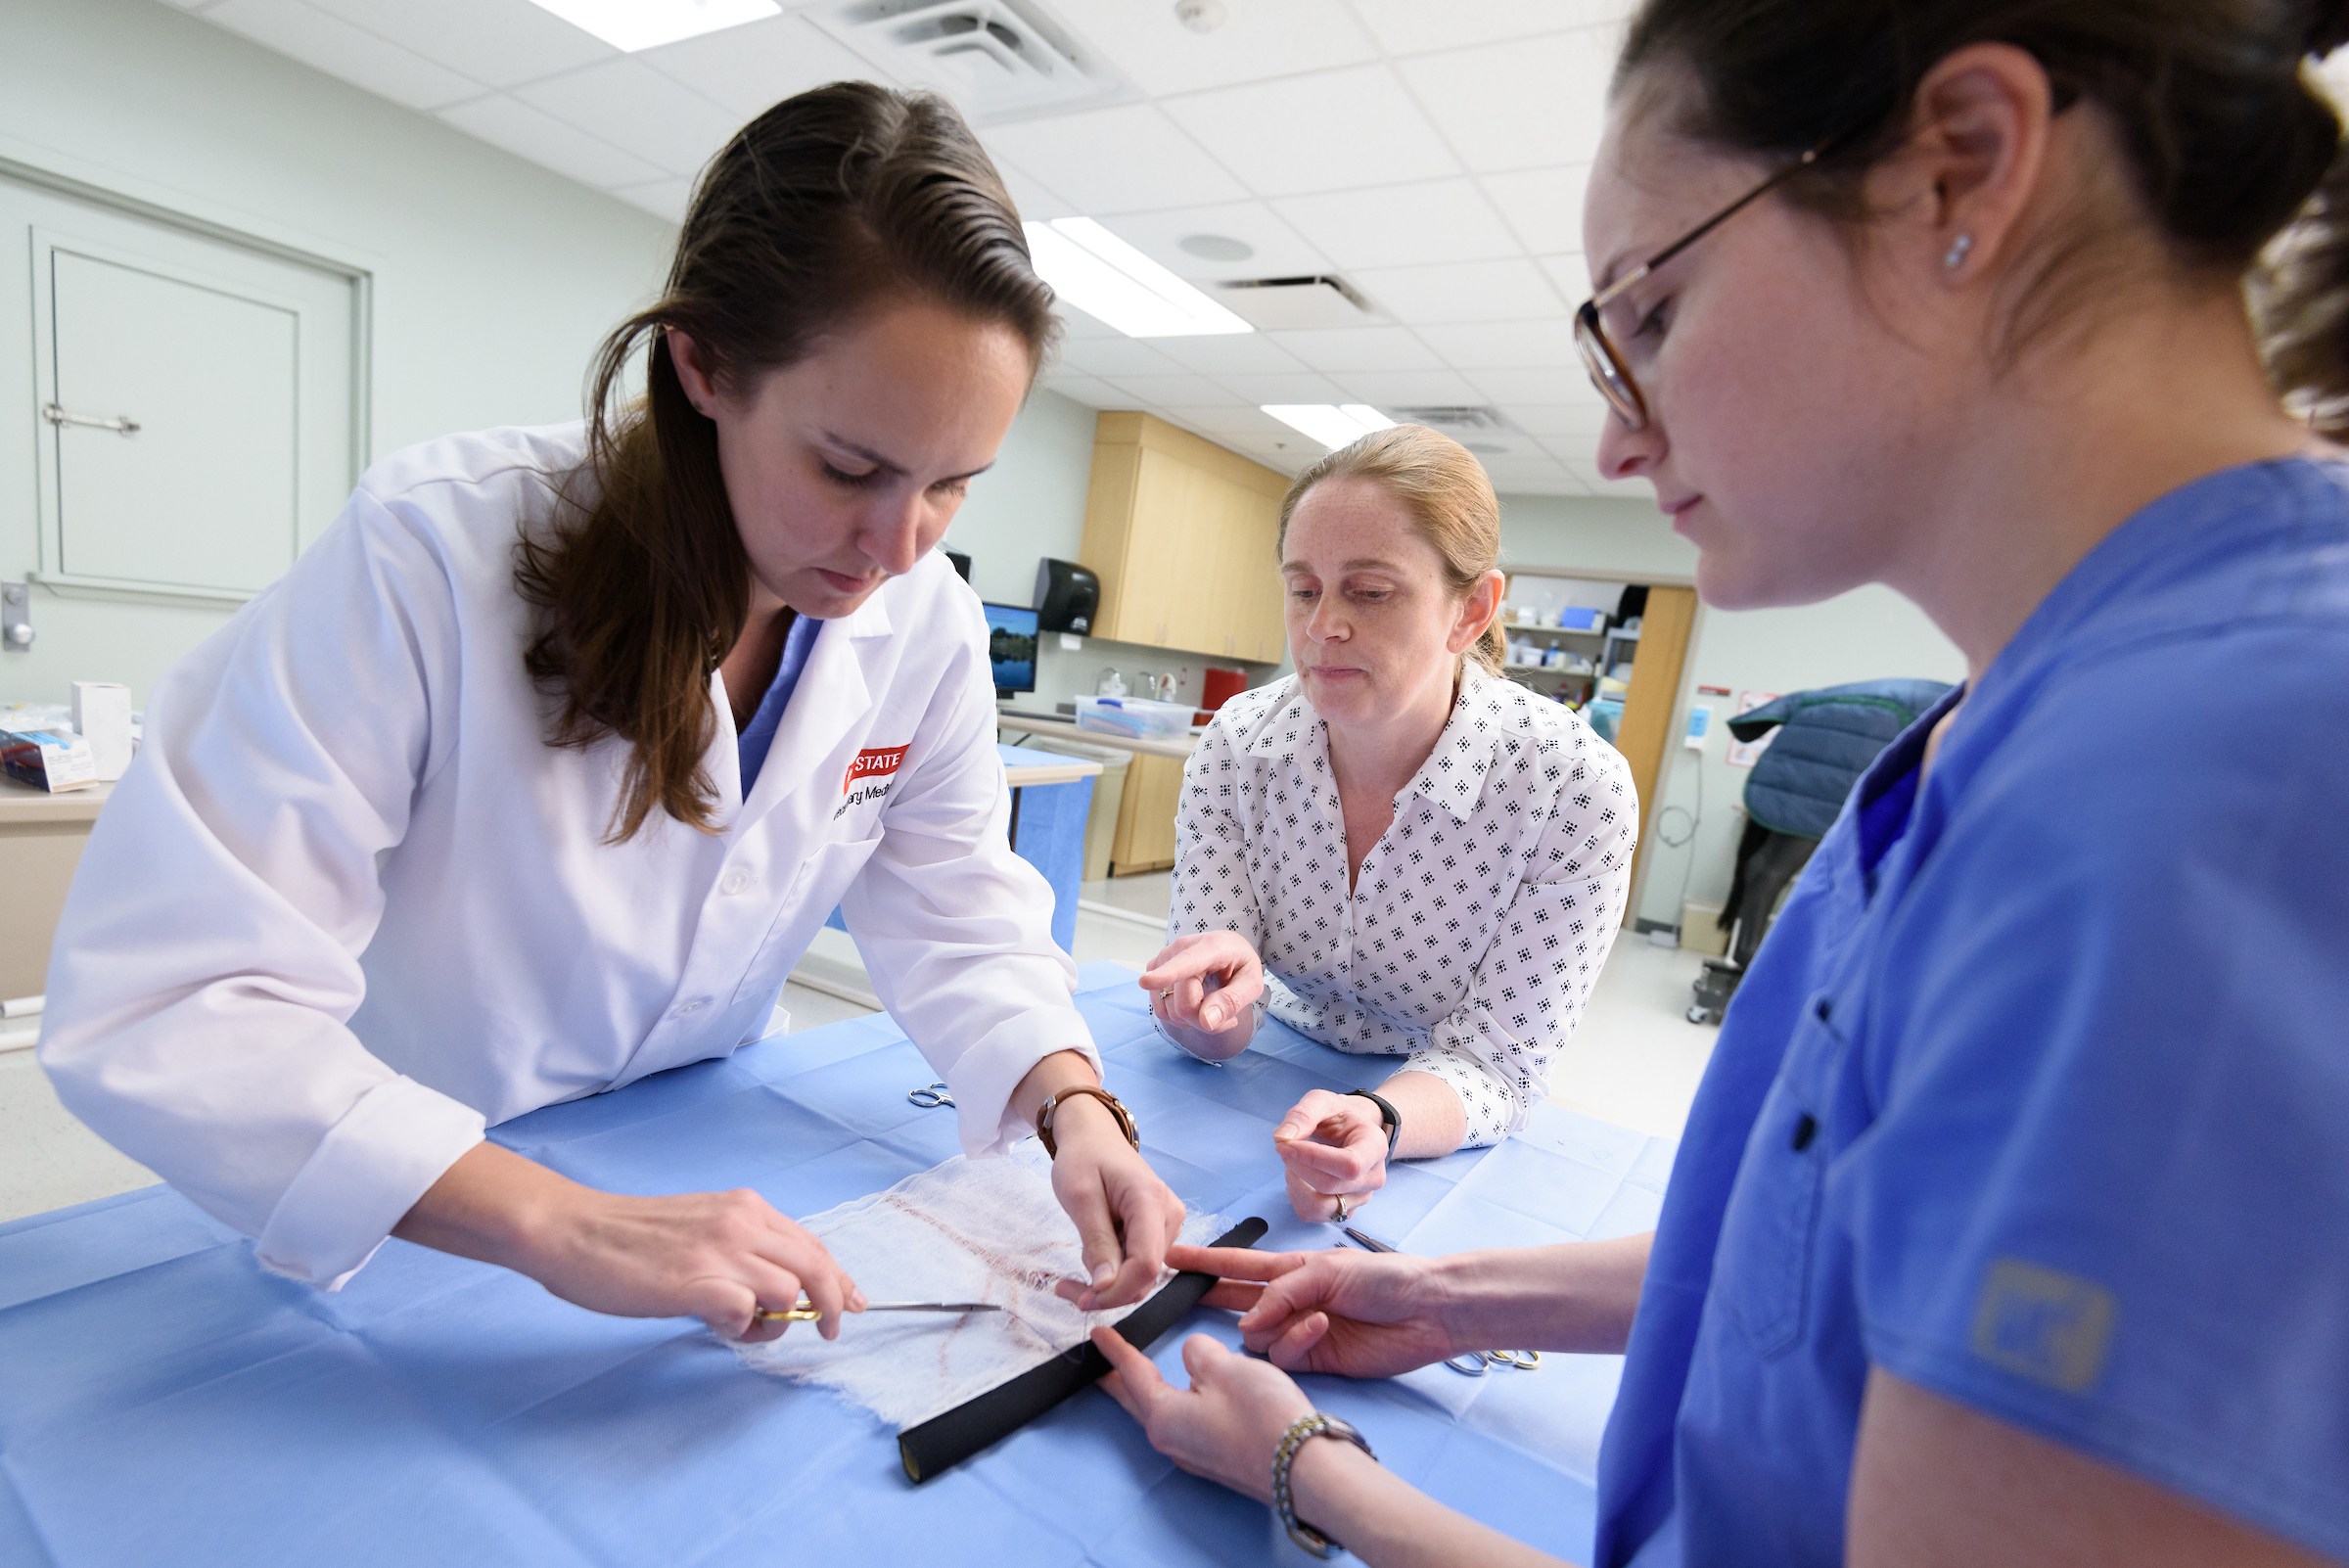 Three female doctors perform an anastamosis in a simulation lab.